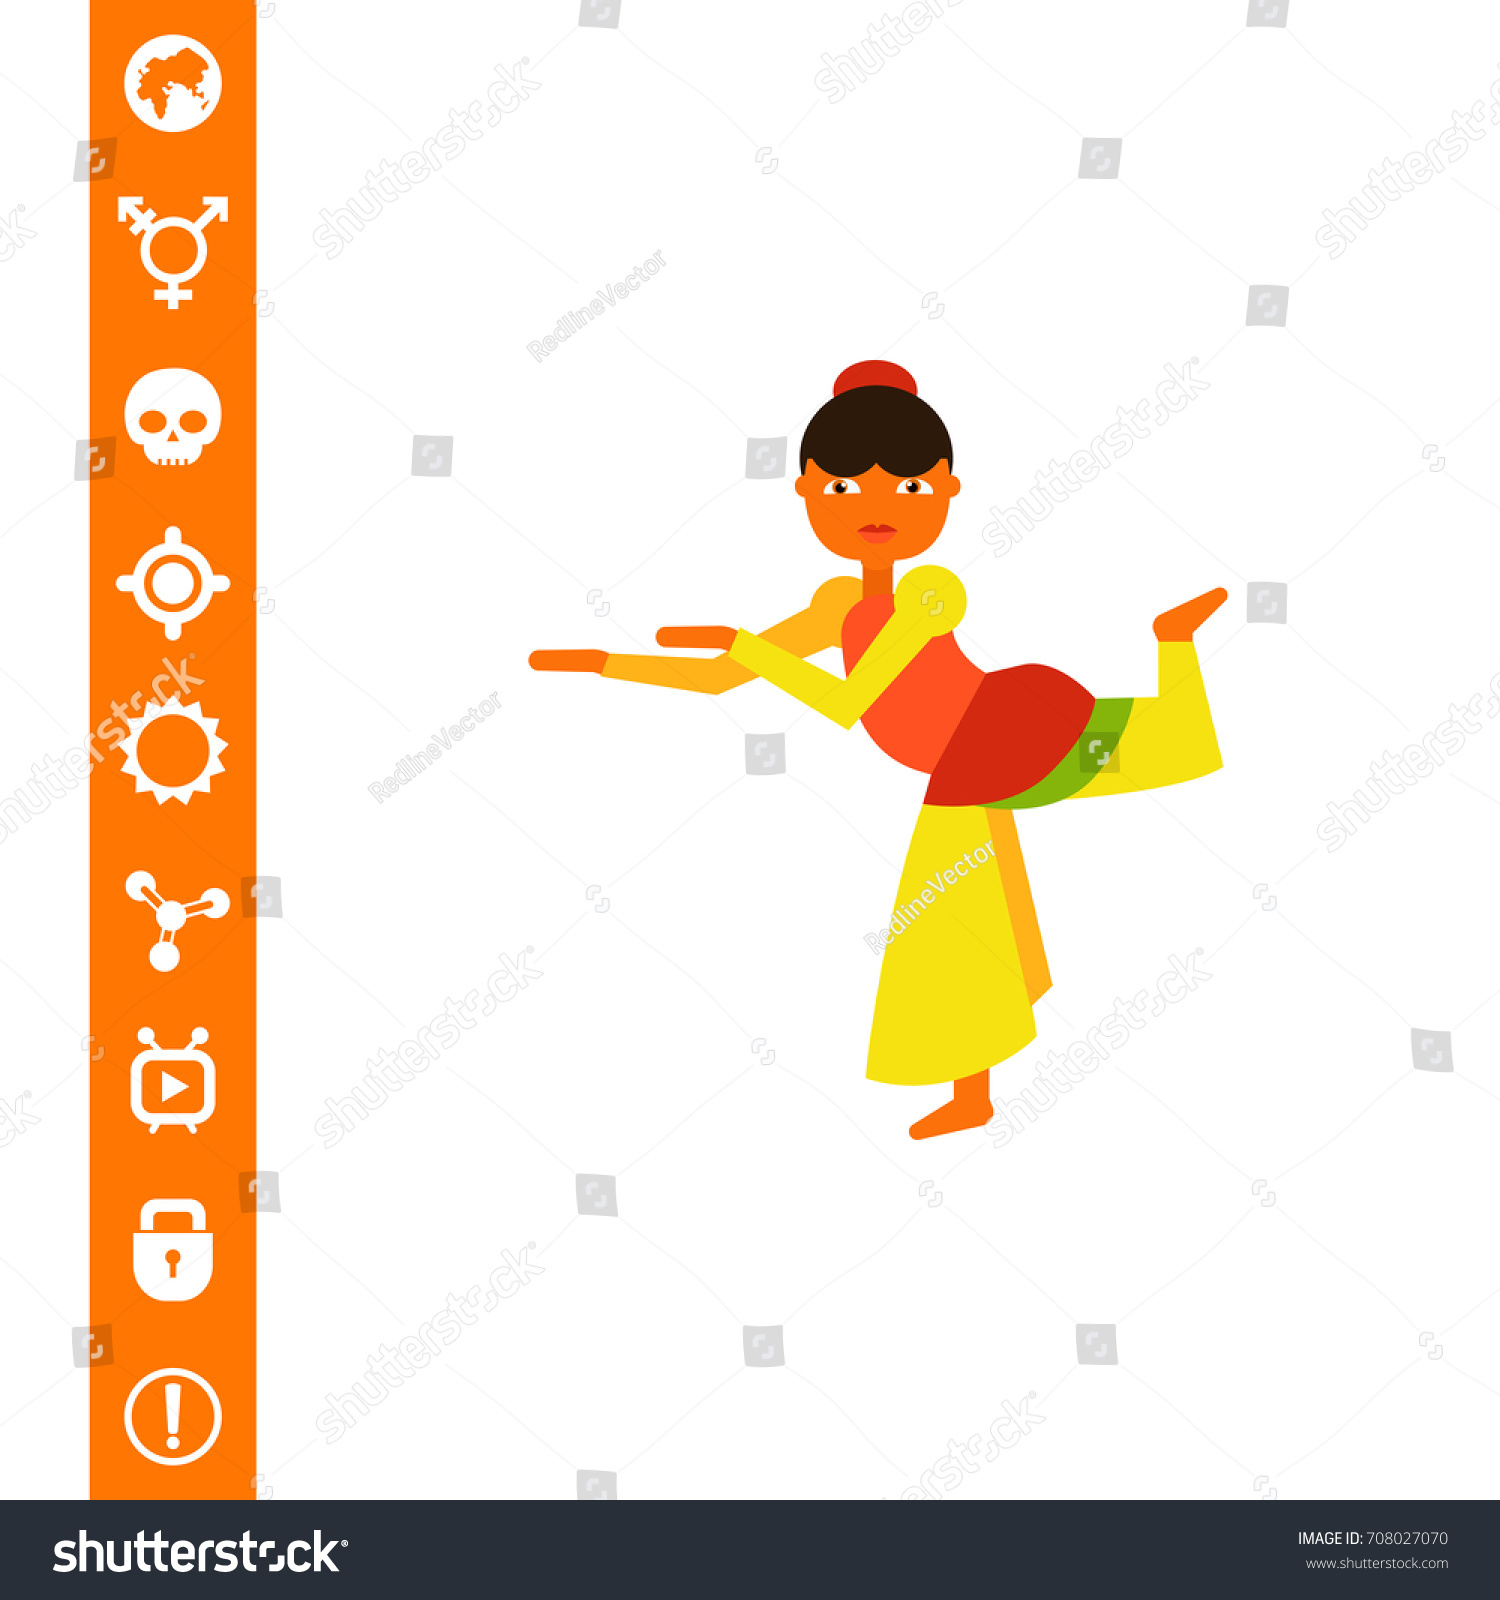 Indian Woman Dancing Icon #708027070